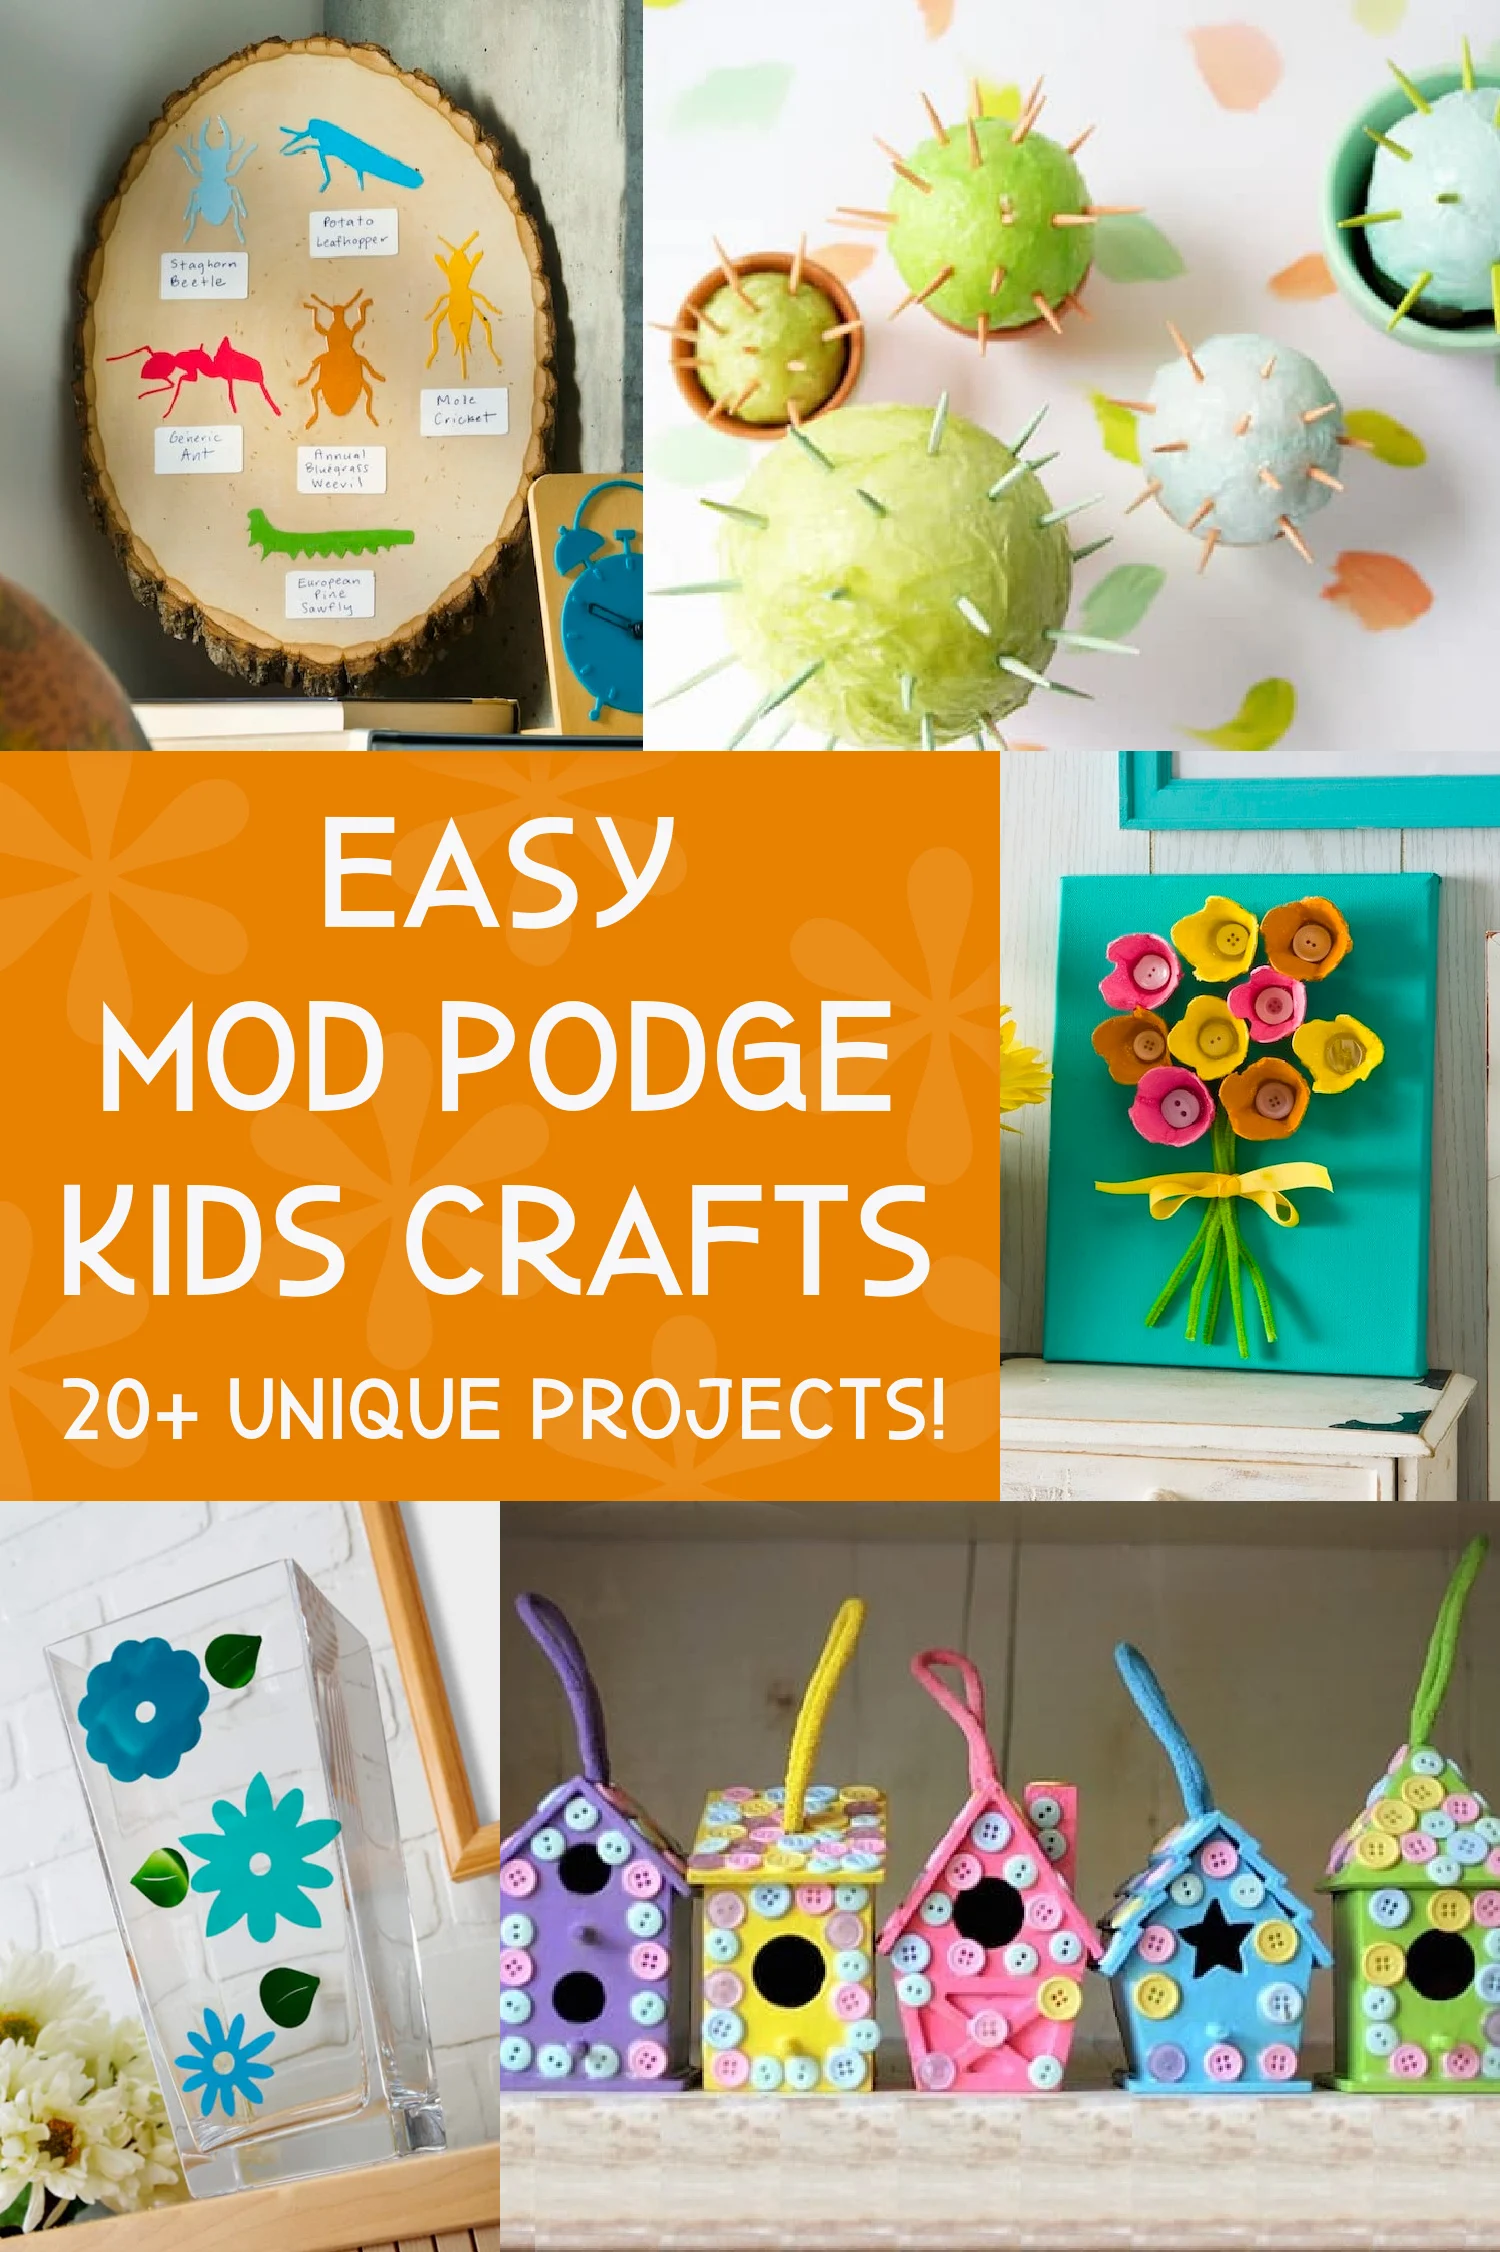 Make Your Own Mod Podge for Decoupage Crafts - The Make Your Own Zone